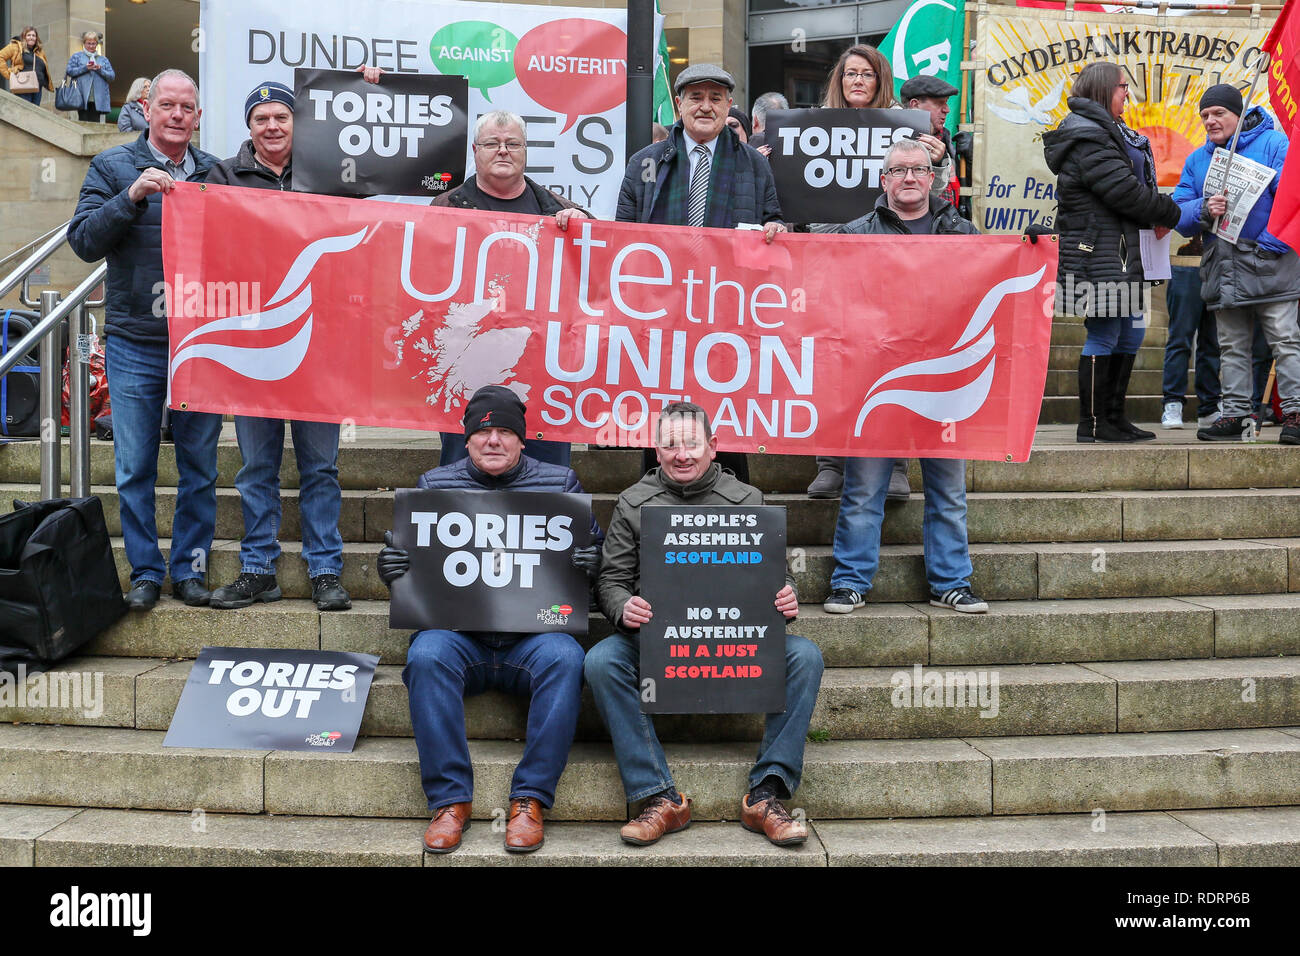 Glasgow, UK. 19th January 2019. Several hundred trades union activists and supporters attended a rally in Buchanan Street, Glasgow as a demonstration against government cuts to local services resulting in the loss of almost 50,000 jobs. Several unions were represented including UNITE, UNISON,RMT, PCS and the PRISON OFFICERS UNION Credit: Findlay/Alamy Live News Stock Photo